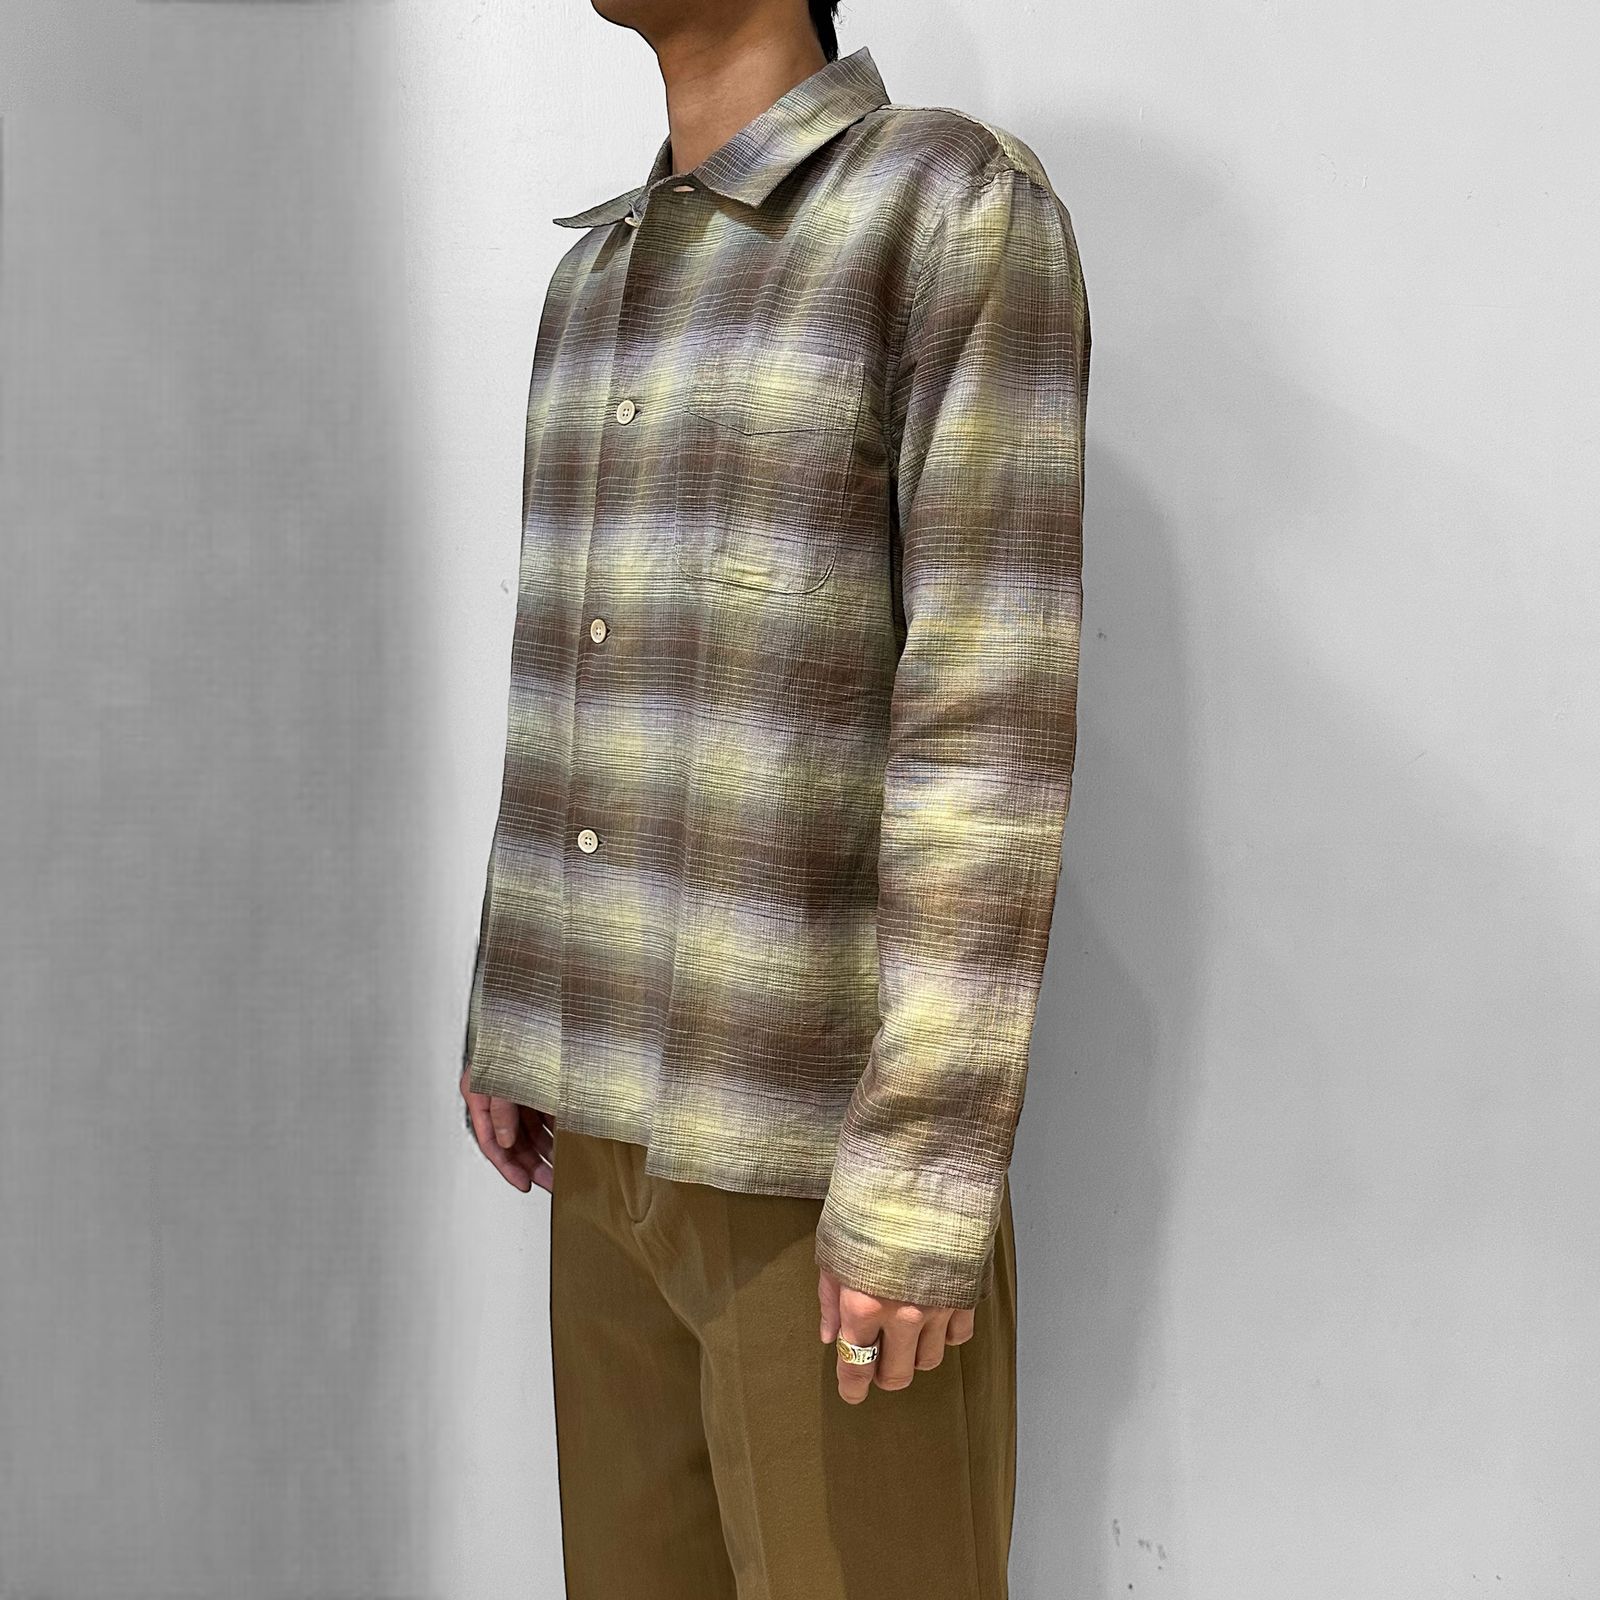 OUR LEGACY - BOX SHIRT /MURKY STATIC SUMMER WEAVE /チェックシャツ 